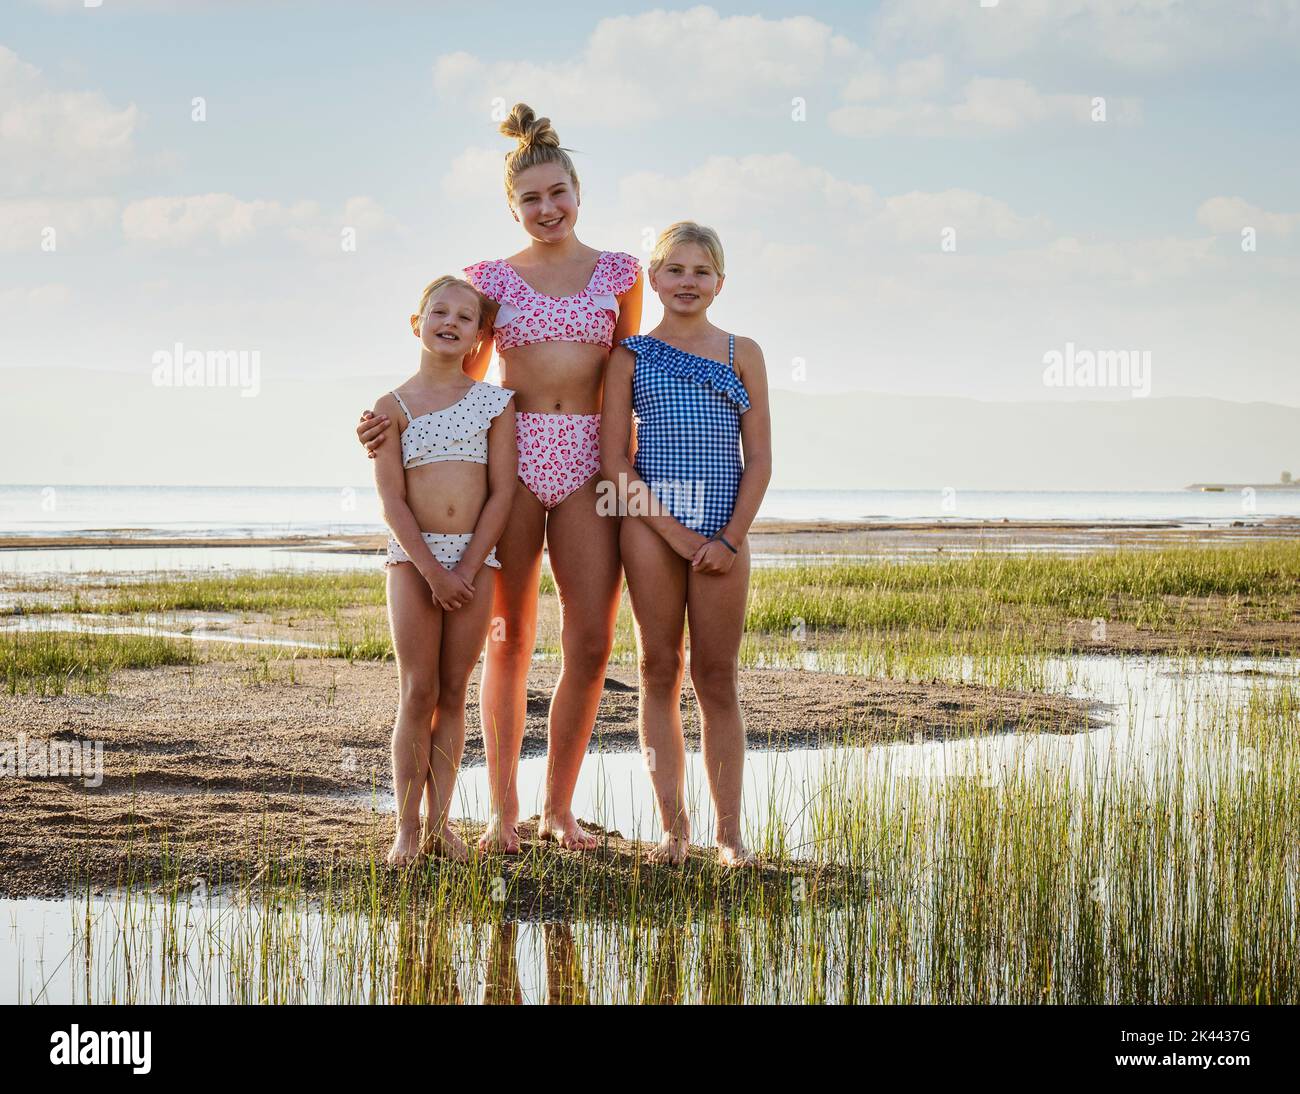 14-15 year old swimsuit Stock Photos - Page 1 : Masterfile